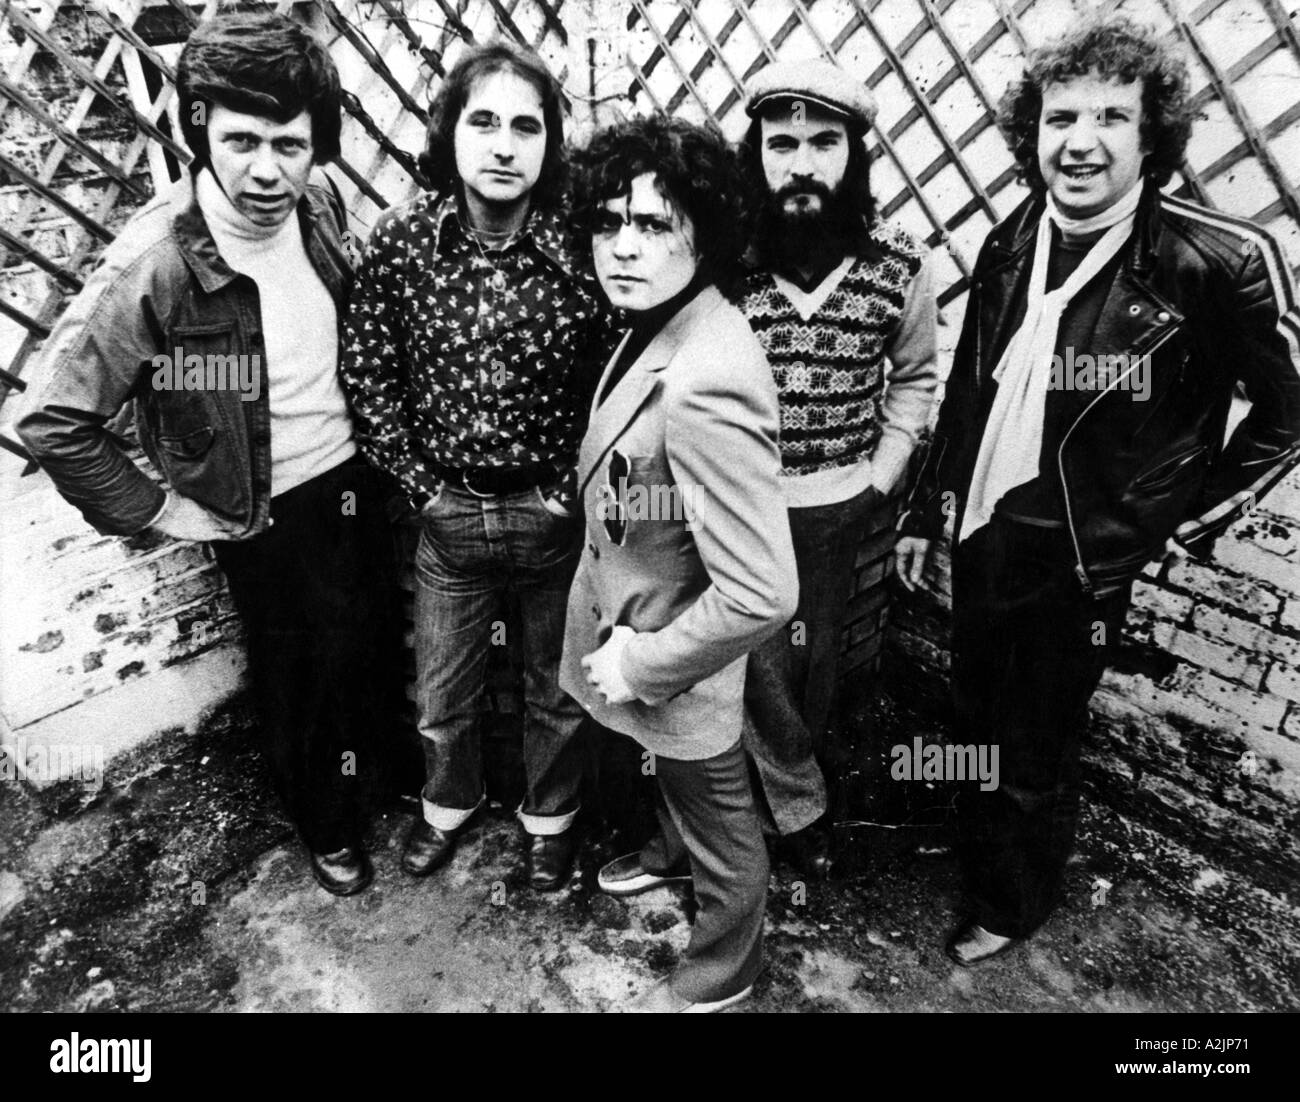 T REX promotional photo about 1968 of the group fronted by Marc Bolan Stock Photo